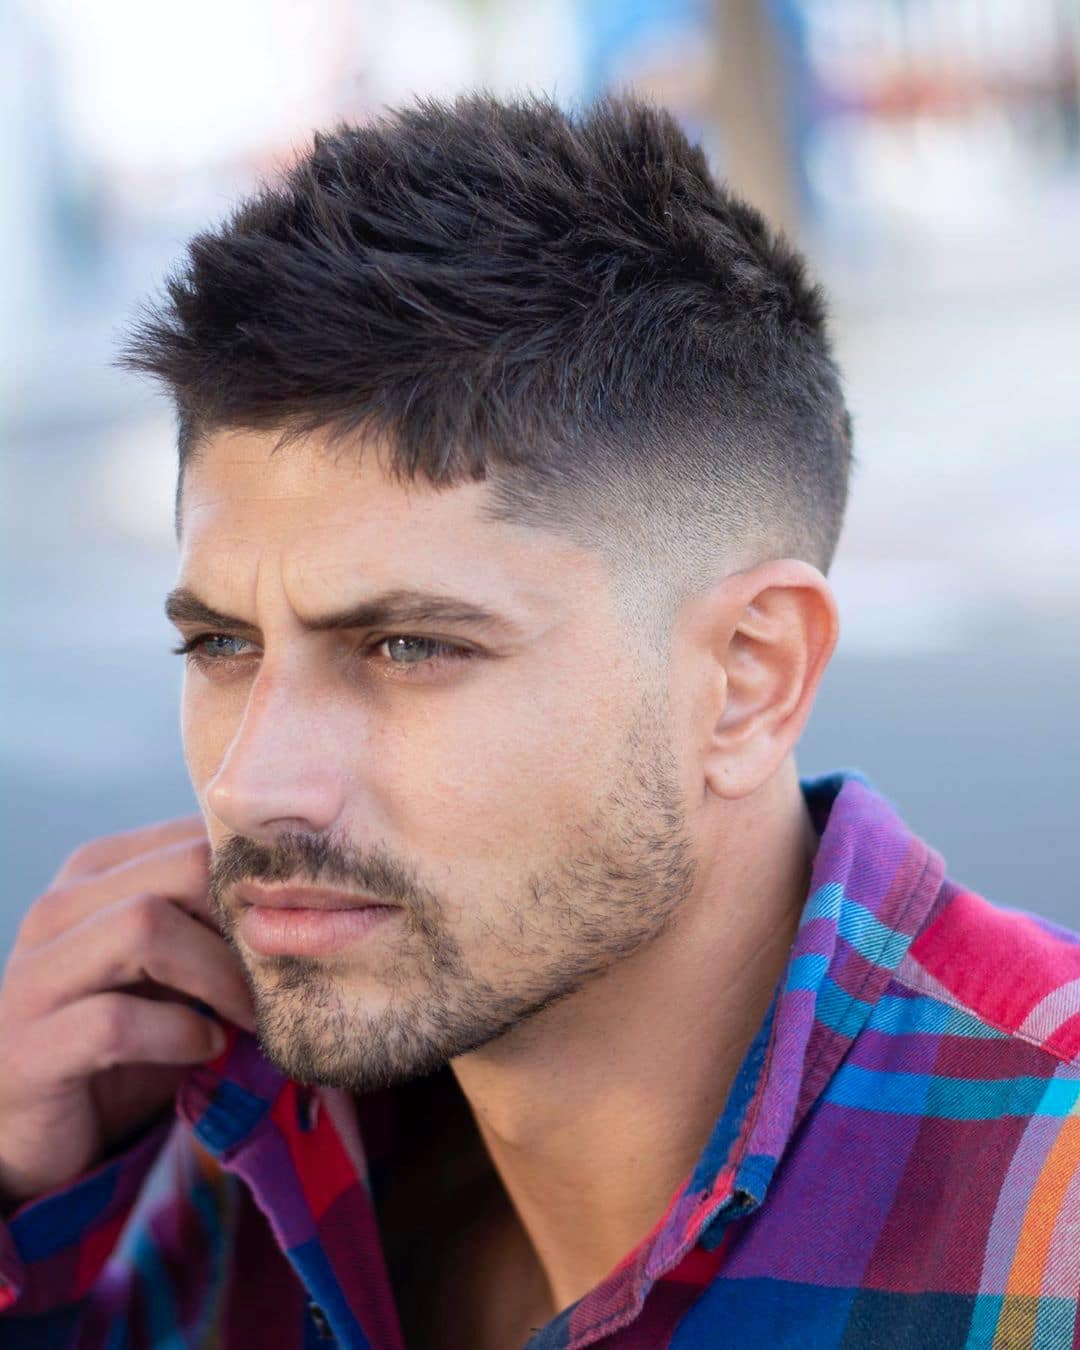 What is the most popular male haircut?